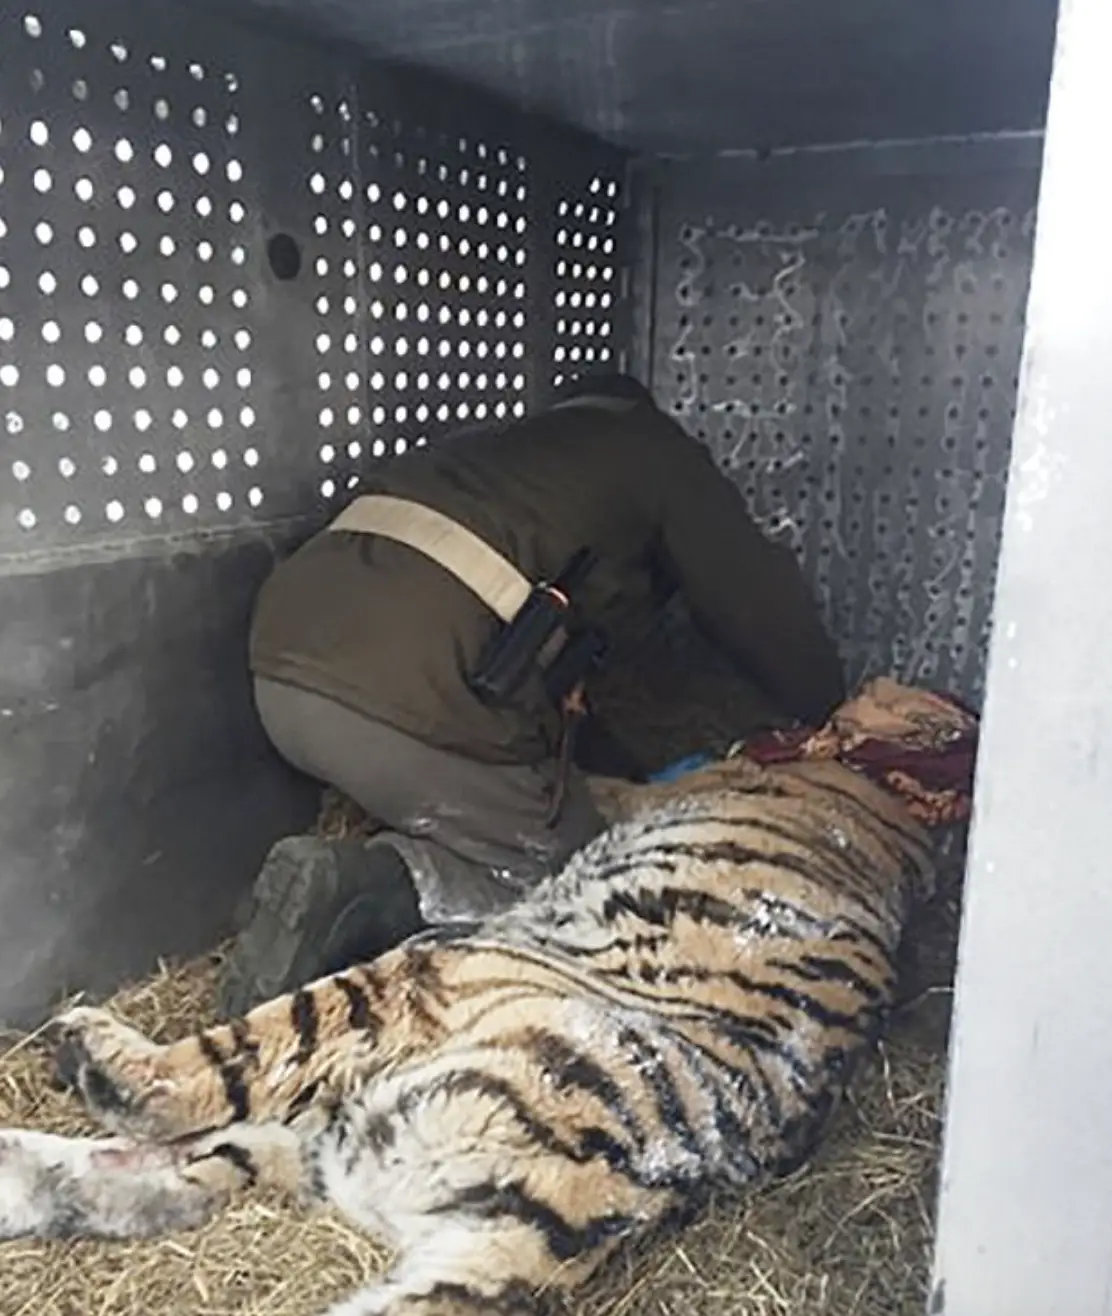 The tigress was sedated in order to be safely transported